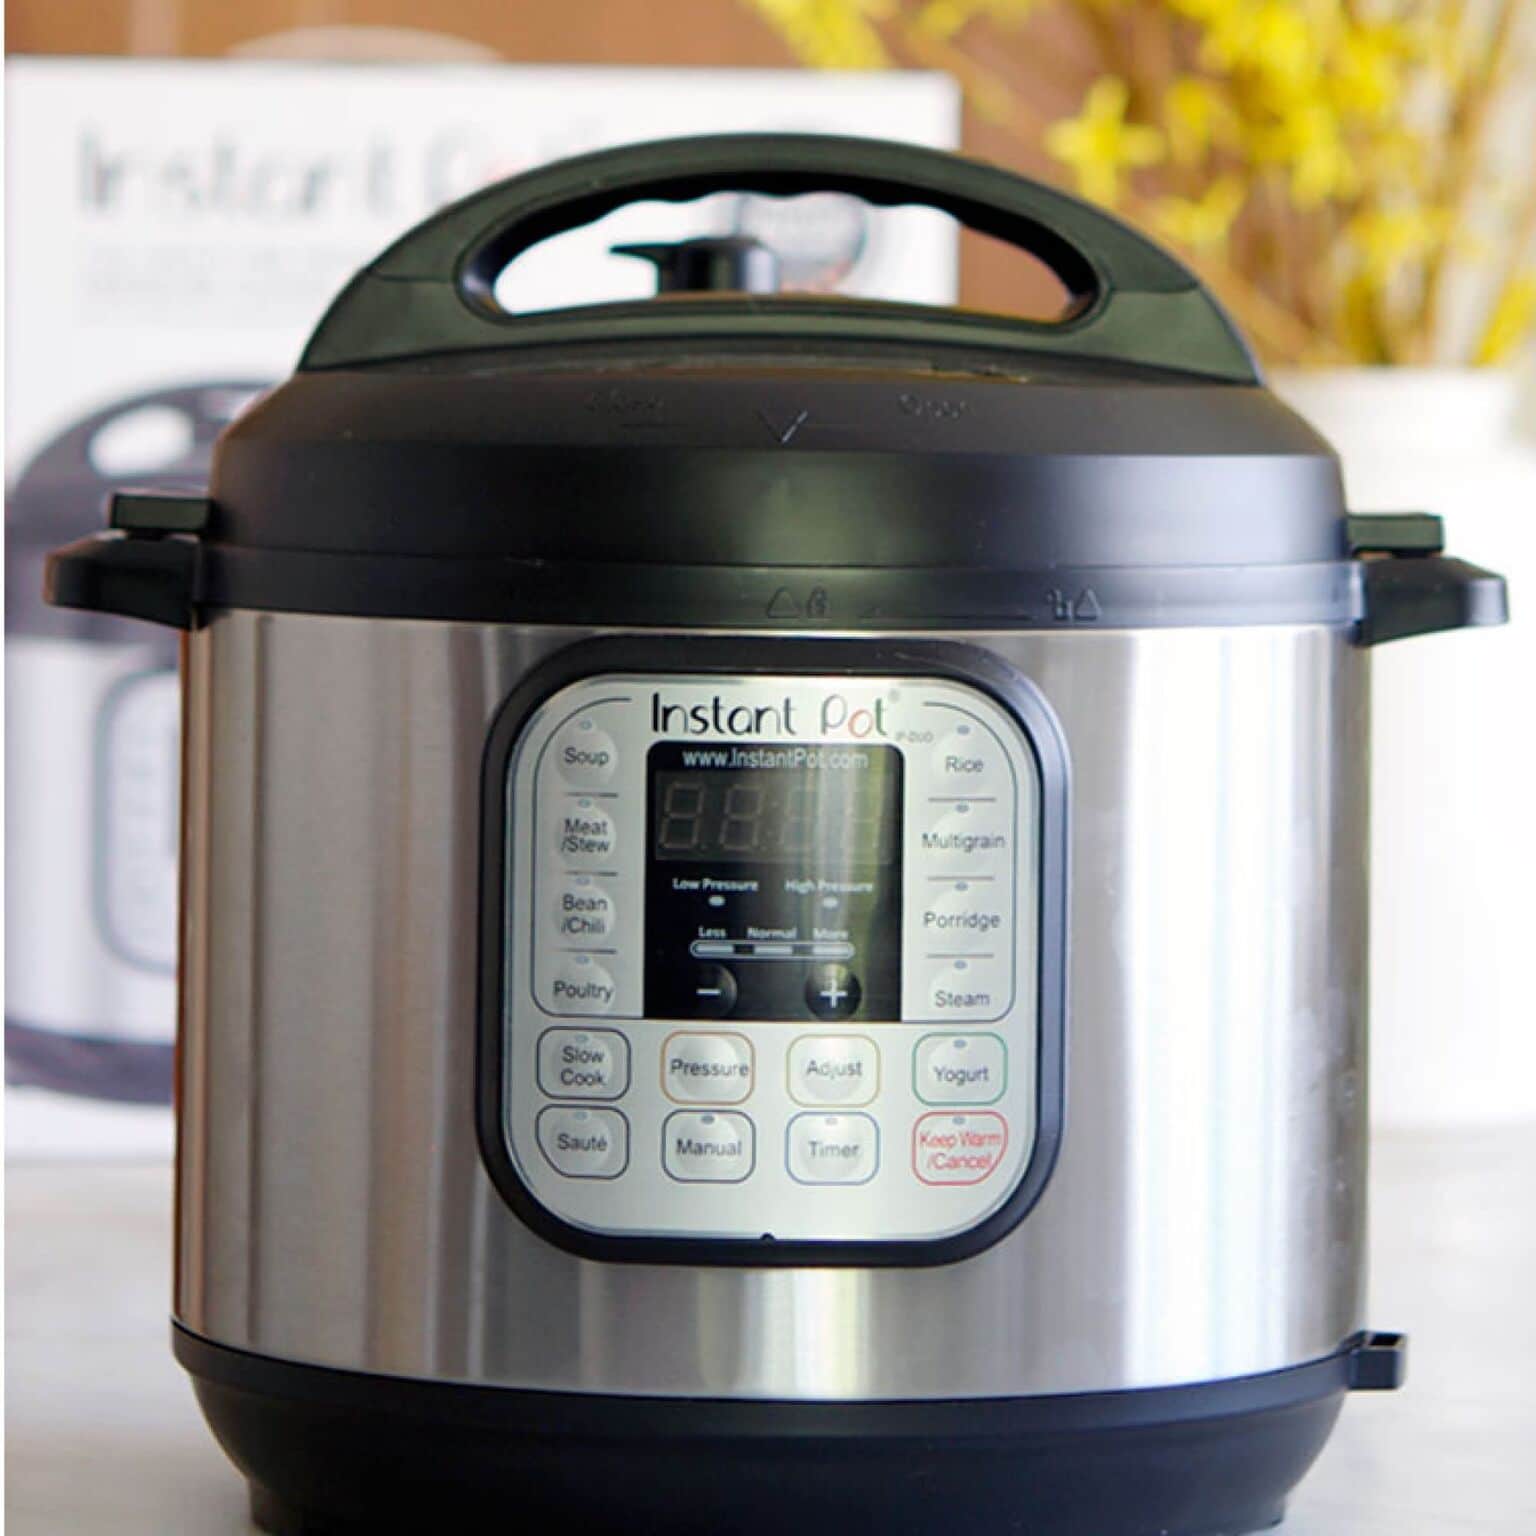 How to Use an Instant Pot - Instant Pot 101 - Beginner? Start HERE! 